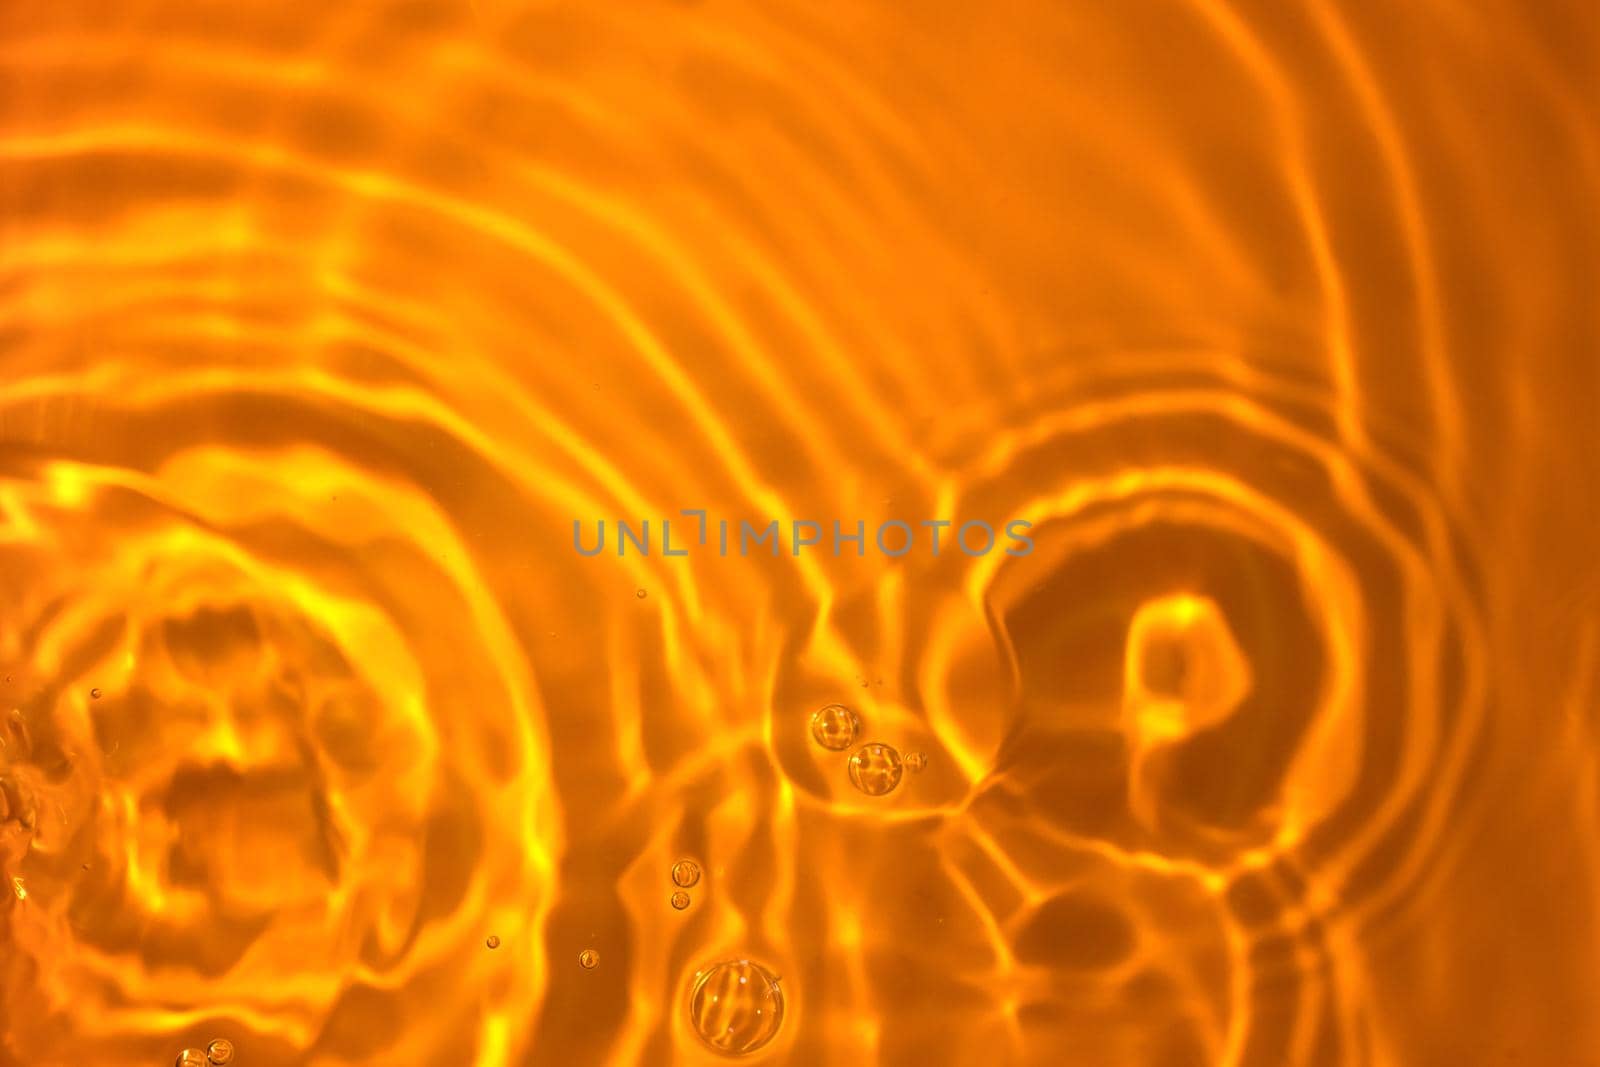 Texture of circles on water. Drops of liquid on orange background by lavsketch